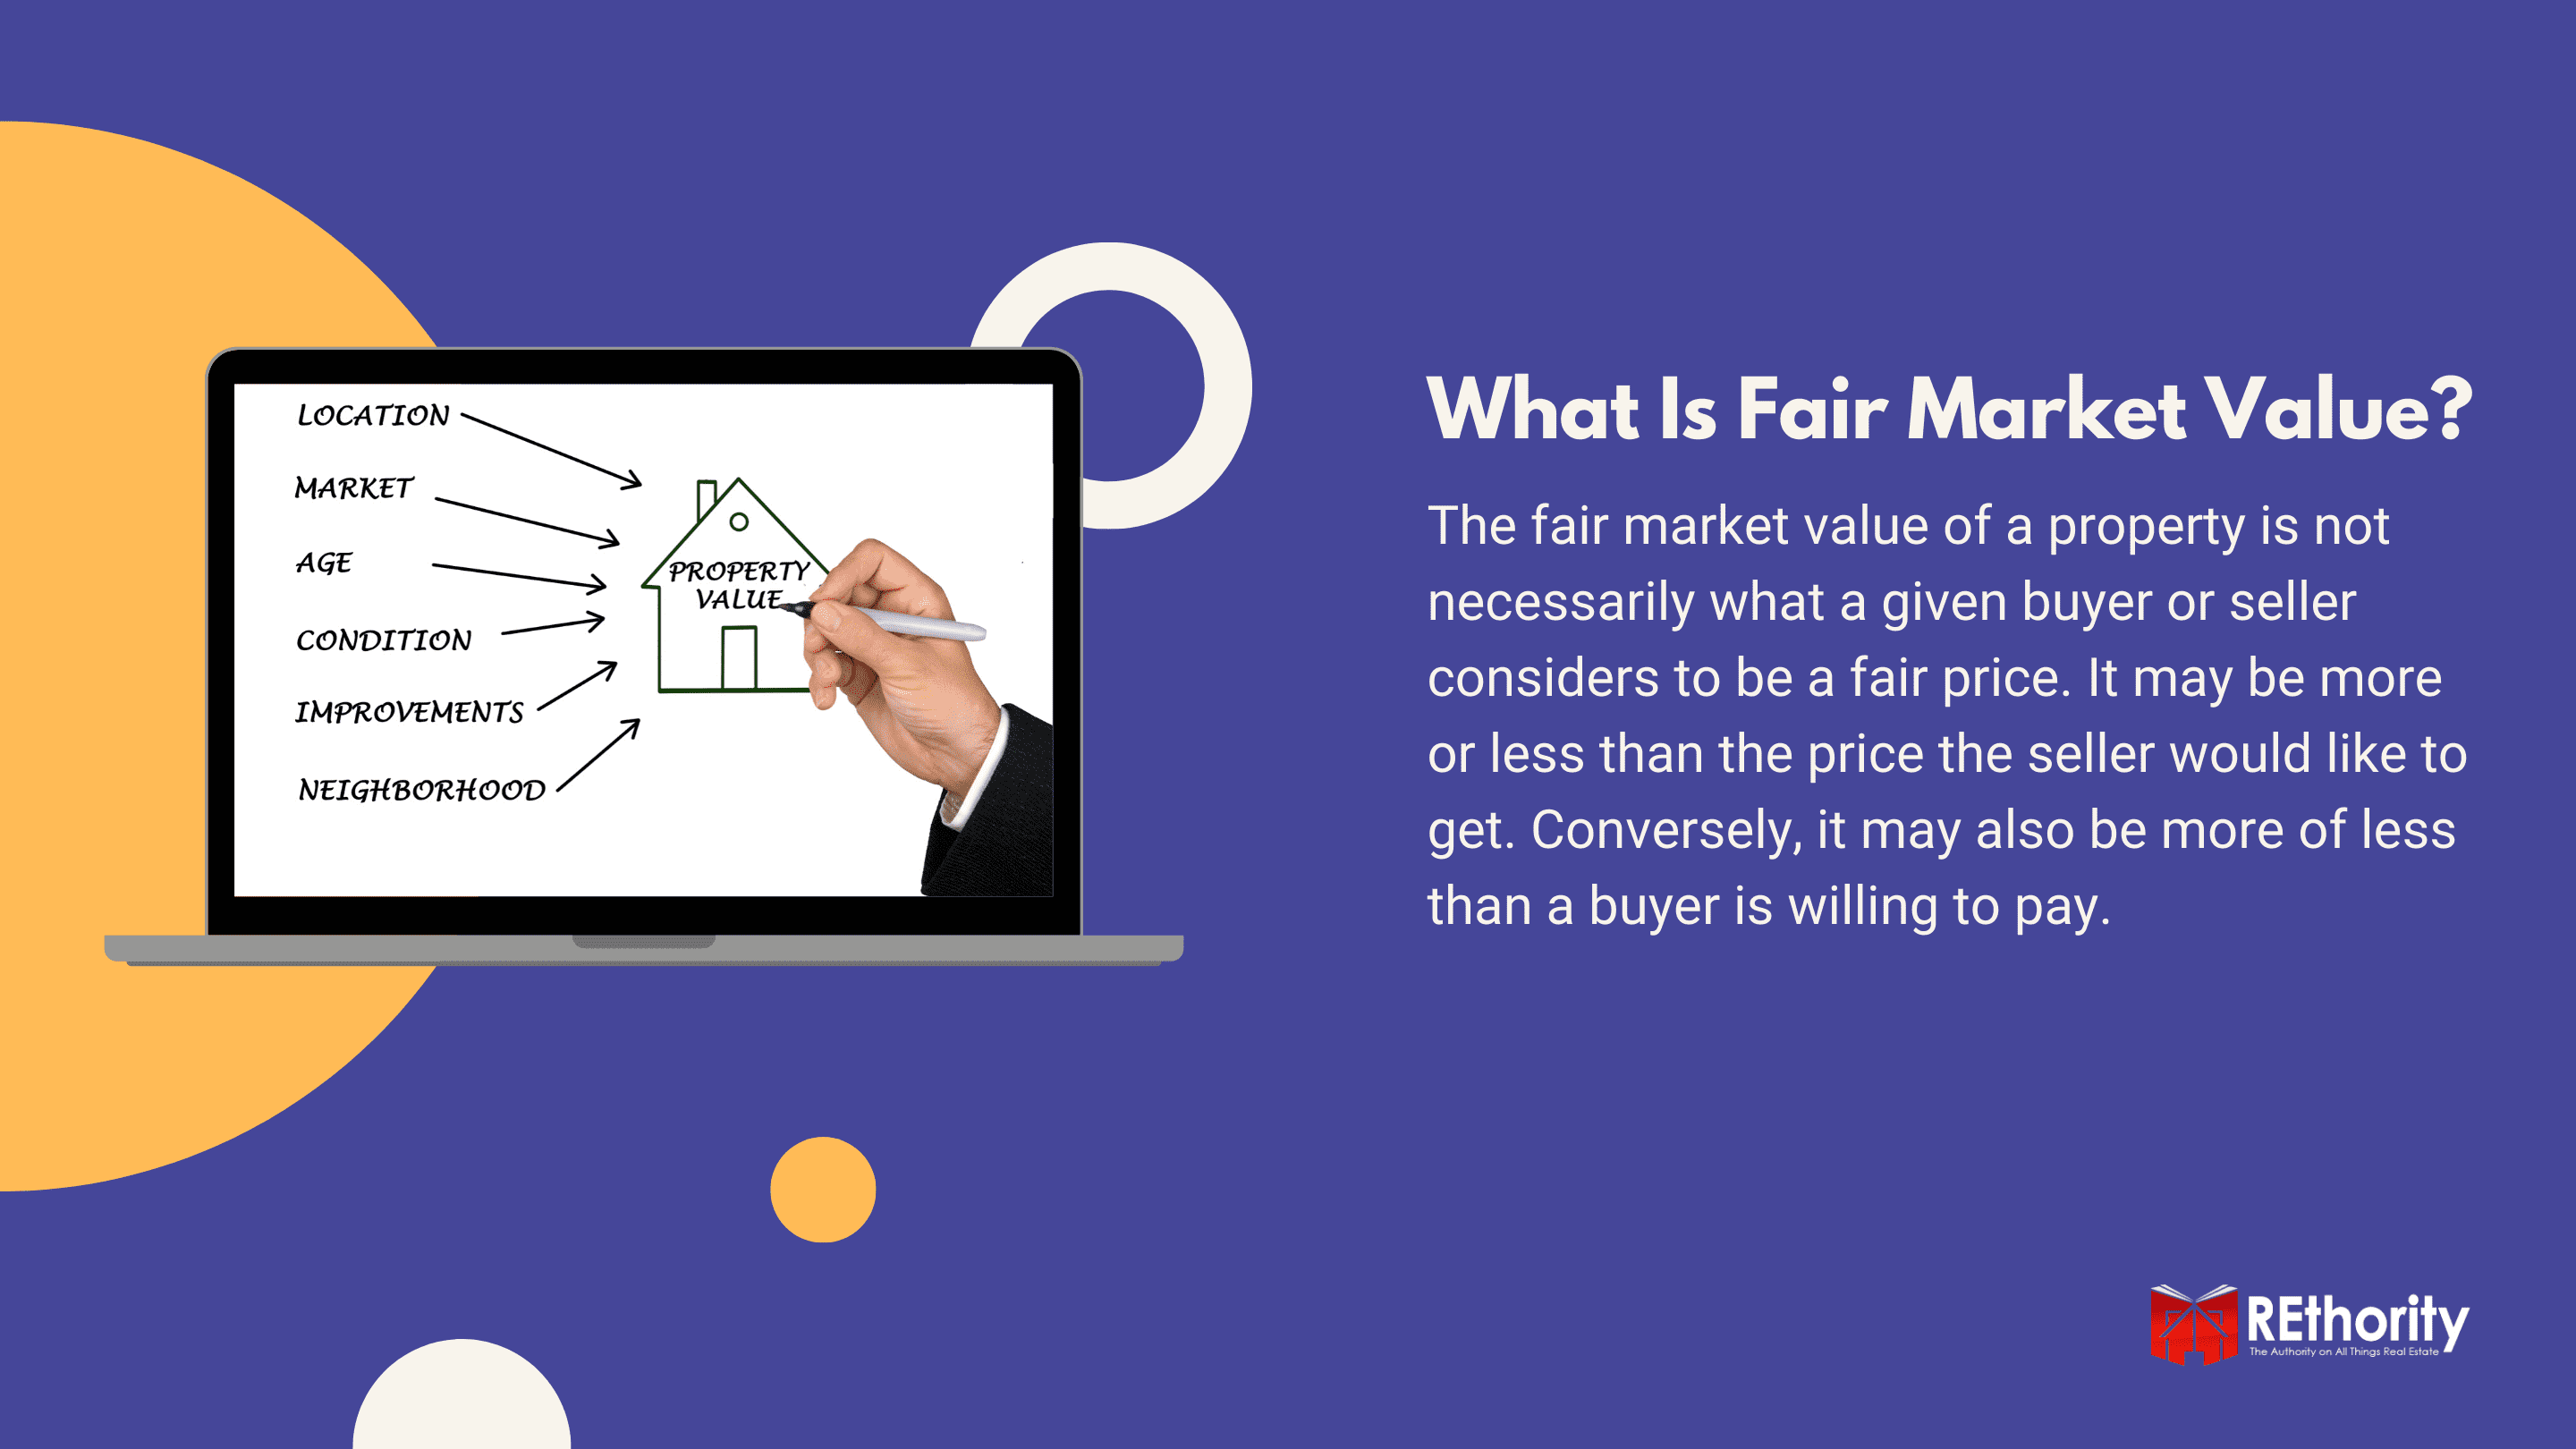 What Is Fair Market Value graphic against blue background